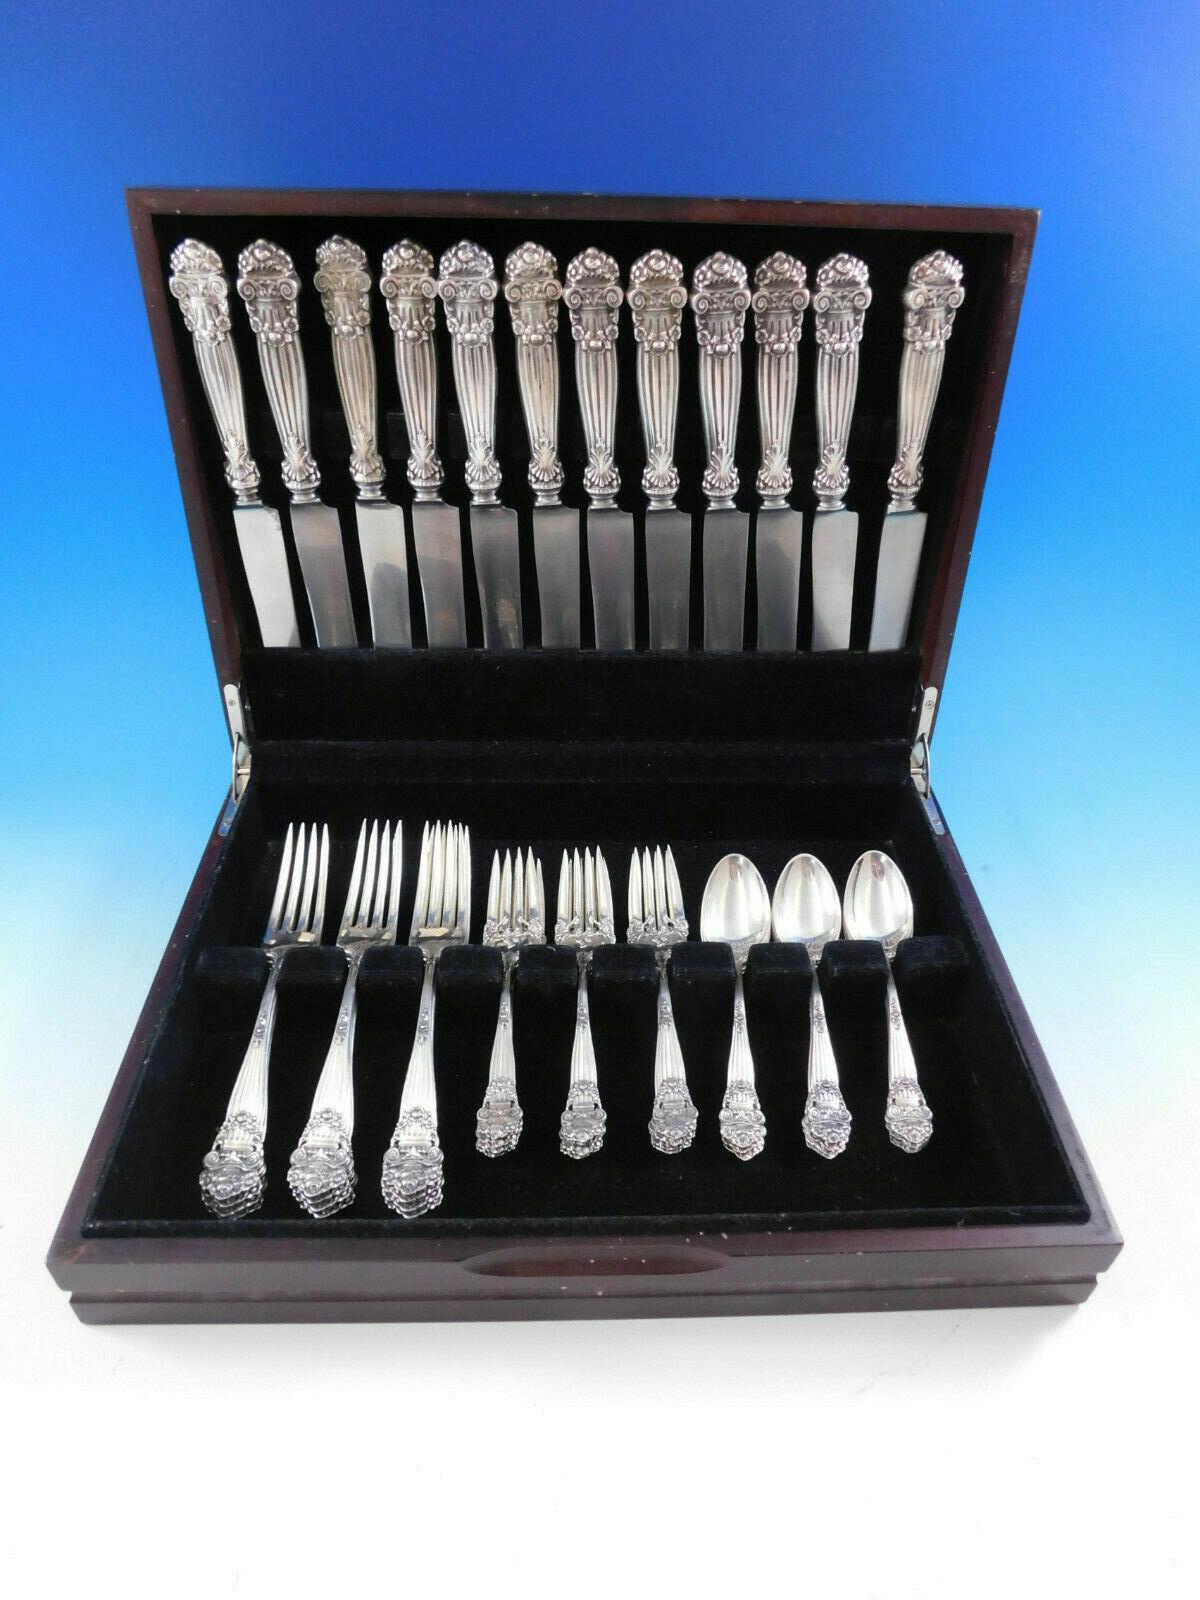 Dinner size Georgian by Towle sterling silver flatware set, 48 pieces. This set includes:

12 dinner size knives, with stainless blades, 9 7/8